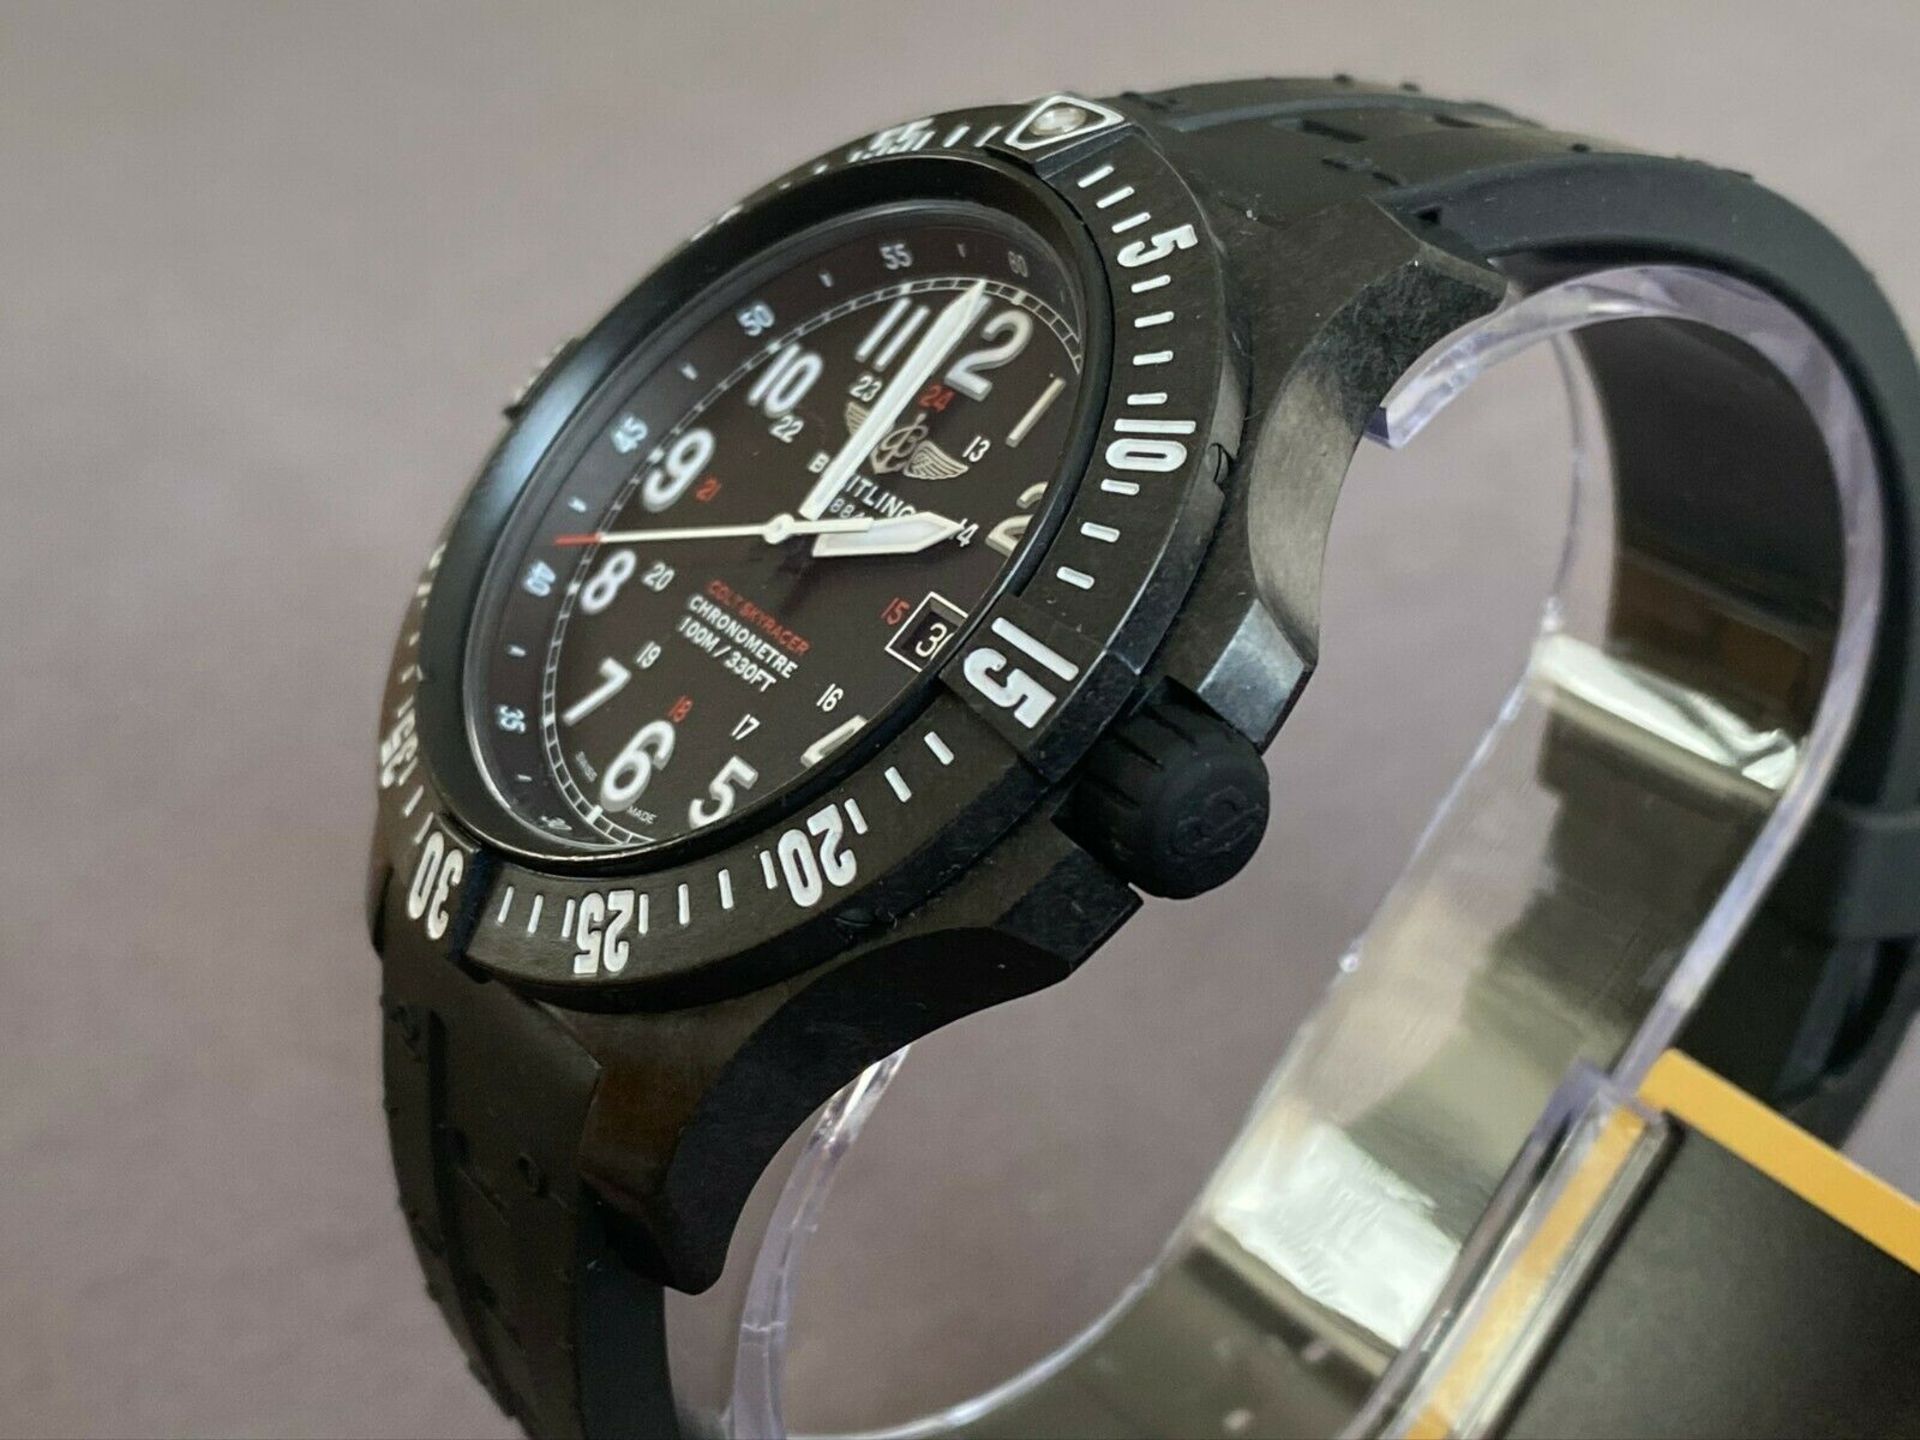 BREITLING COLT SKYRACER MENS WRIST WATCH IN BREITLIGHT BLACK - MINT, AS NEW CONDITION *NO VAT* - Image 6 of 9